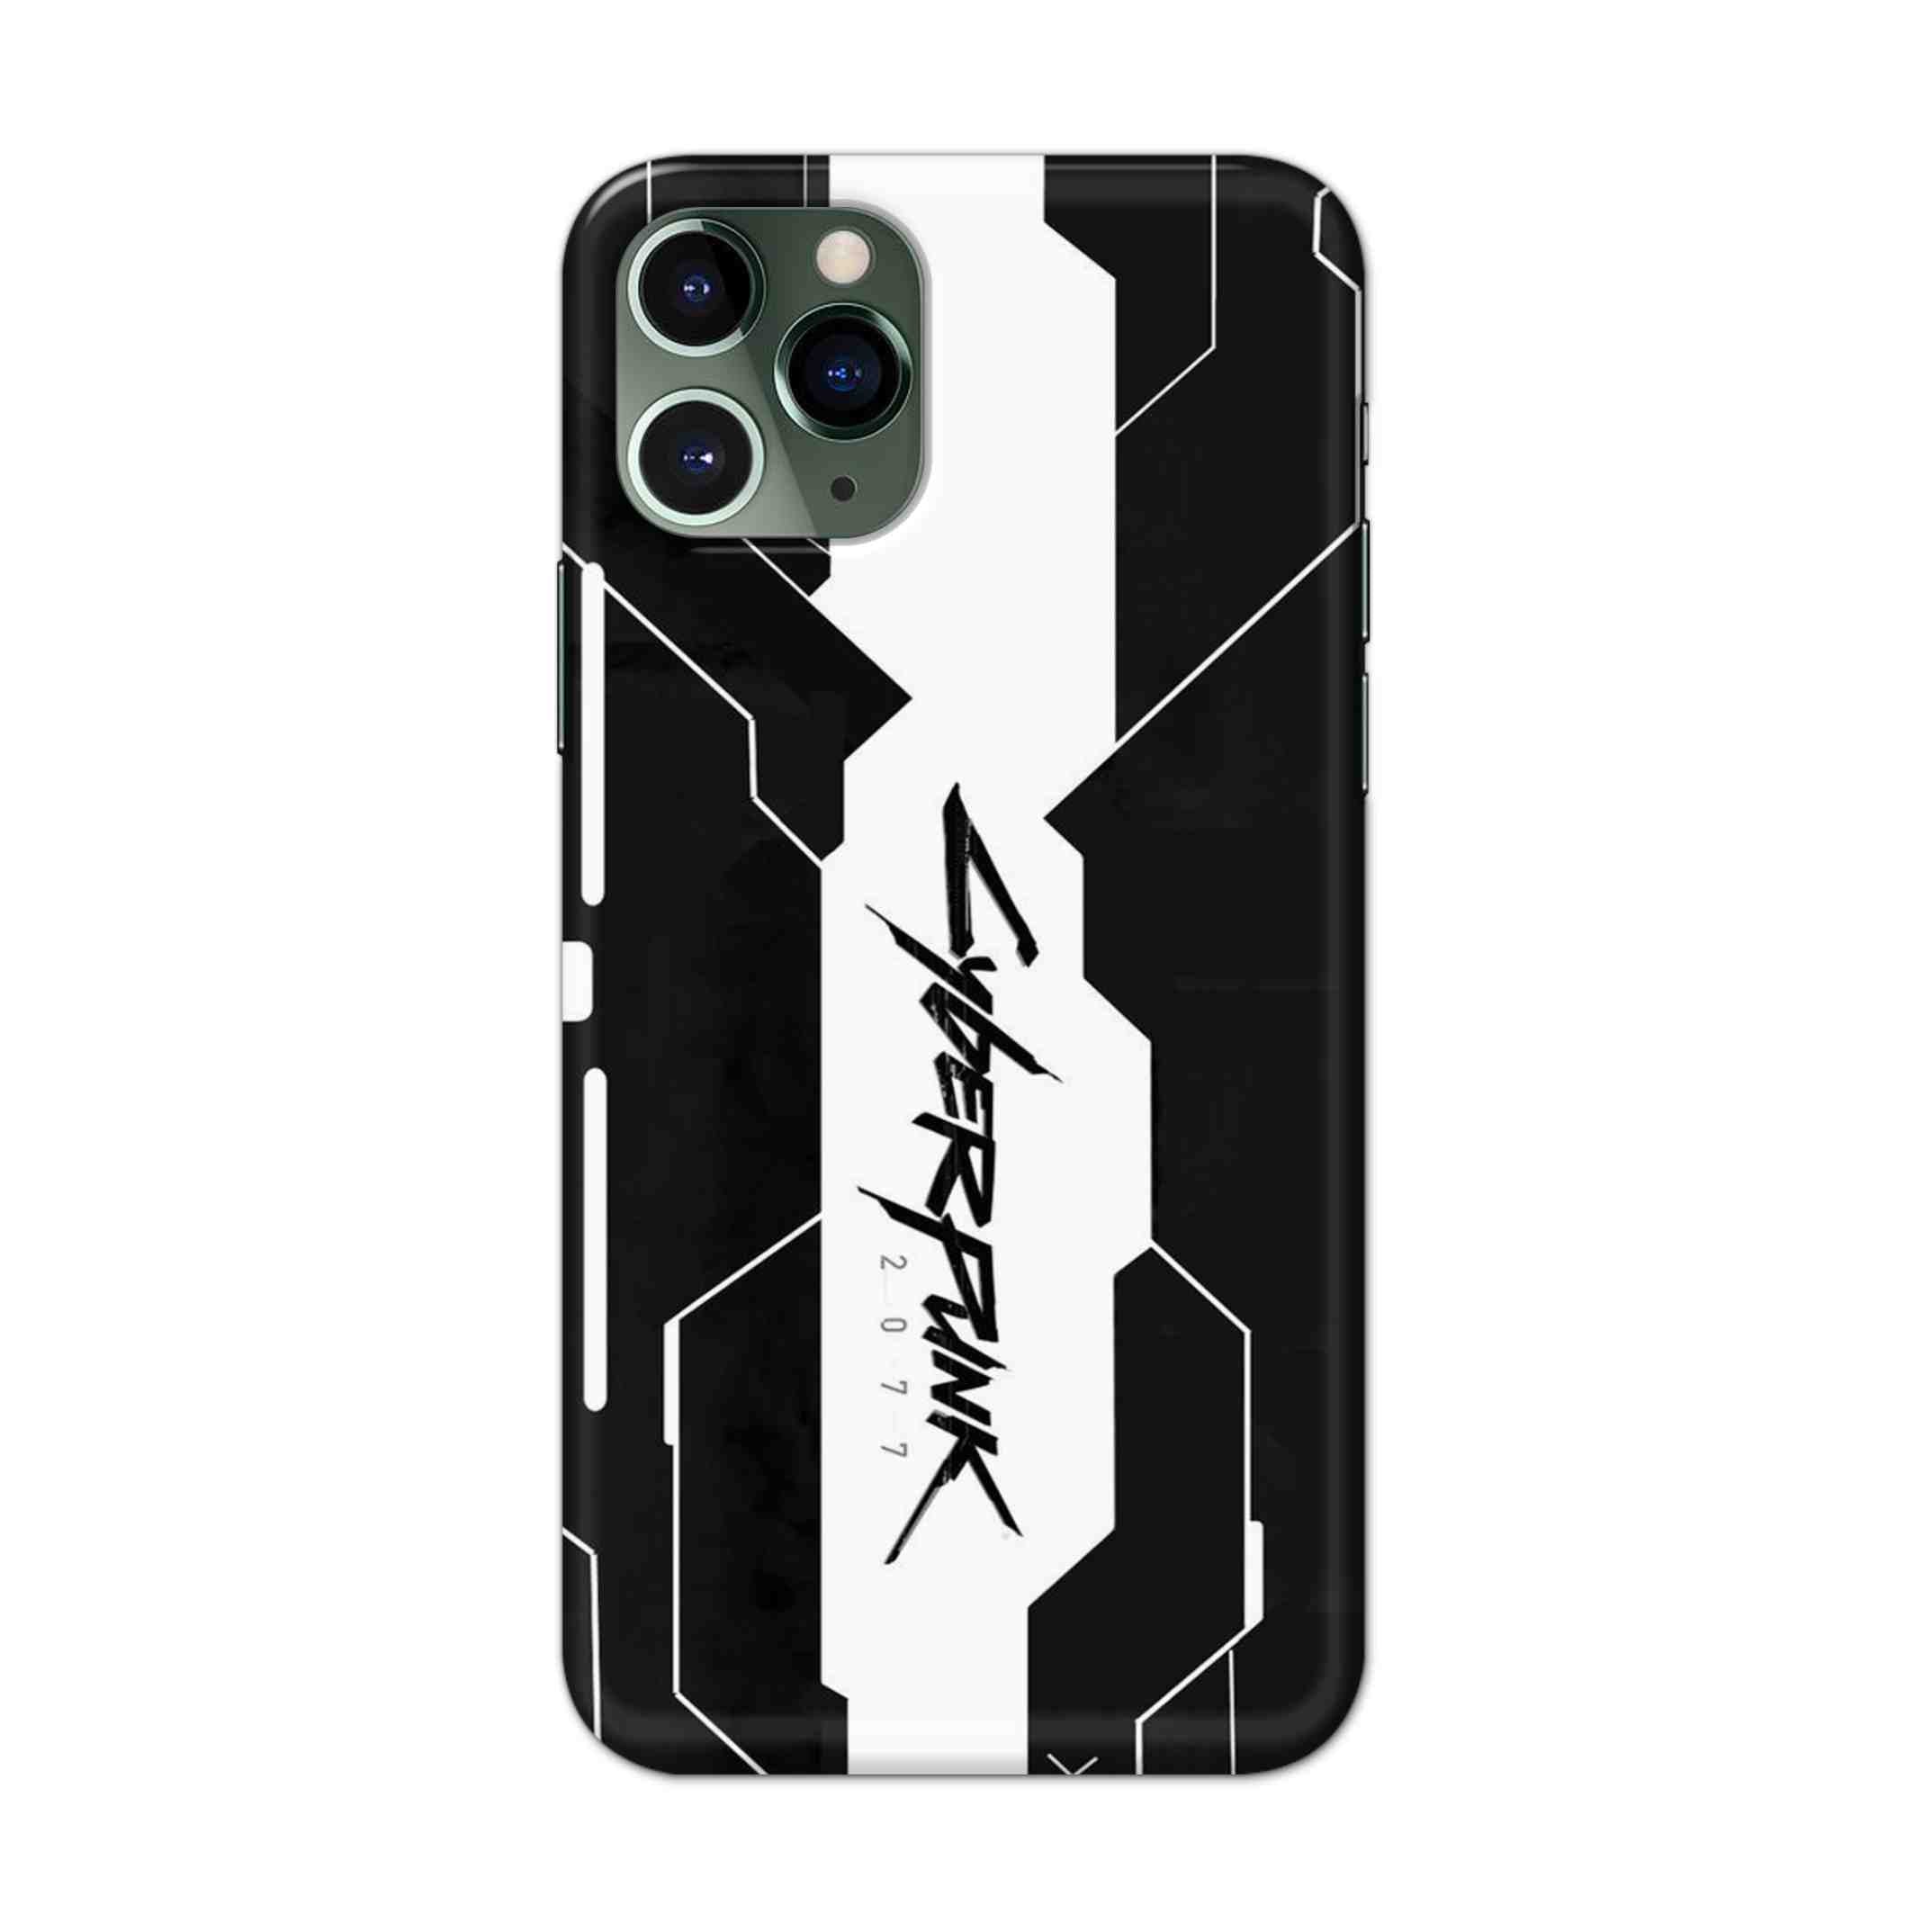 Buy Cyberpunk 2077 Art Hard Back Mobile Phone Case/Cover For iPhone 11 Pro Online